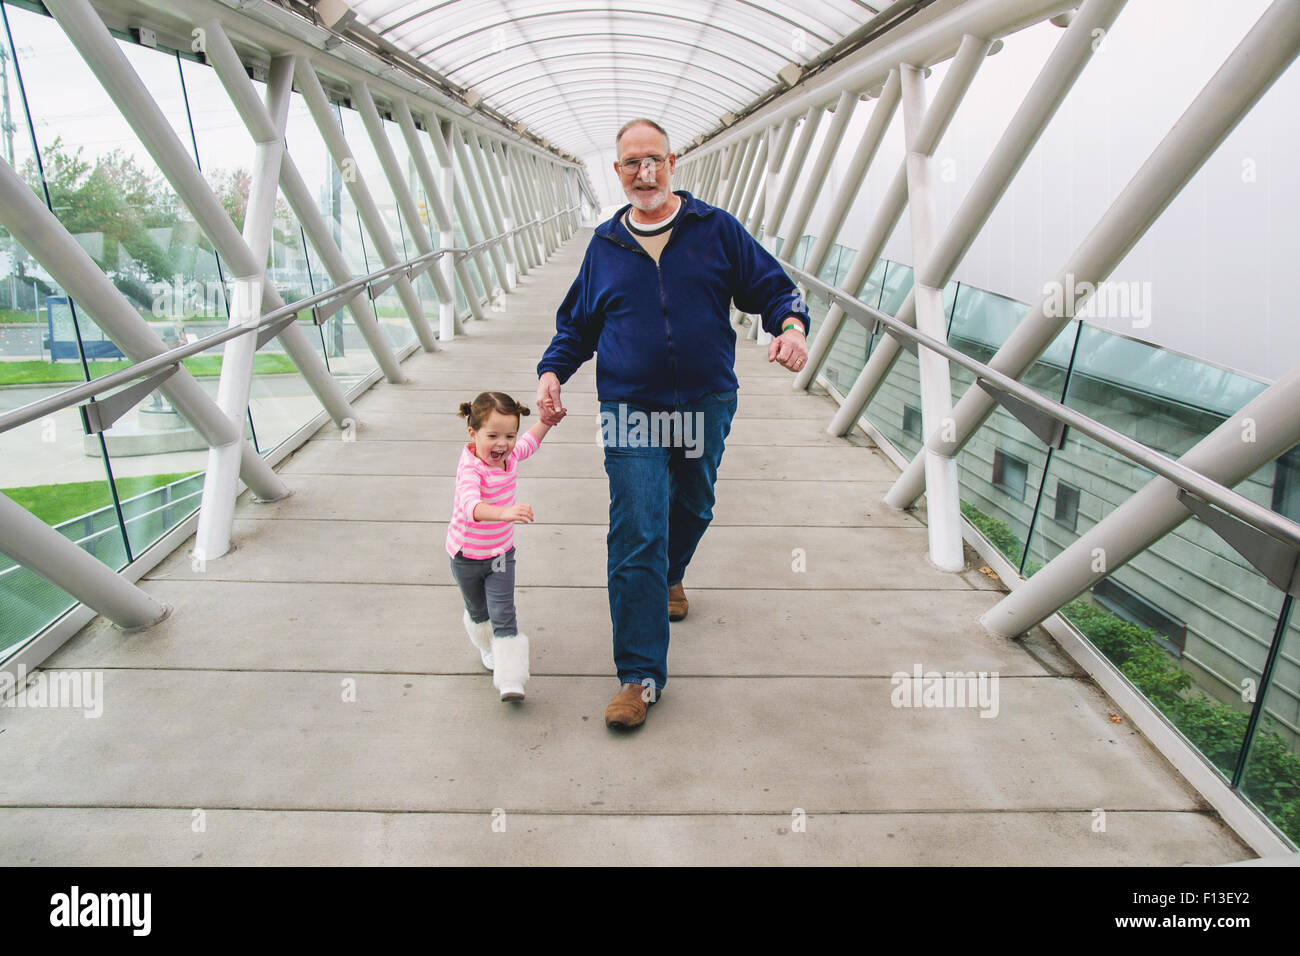 Girl and her grandfather holding hands, walking across a walkway Stock Photo